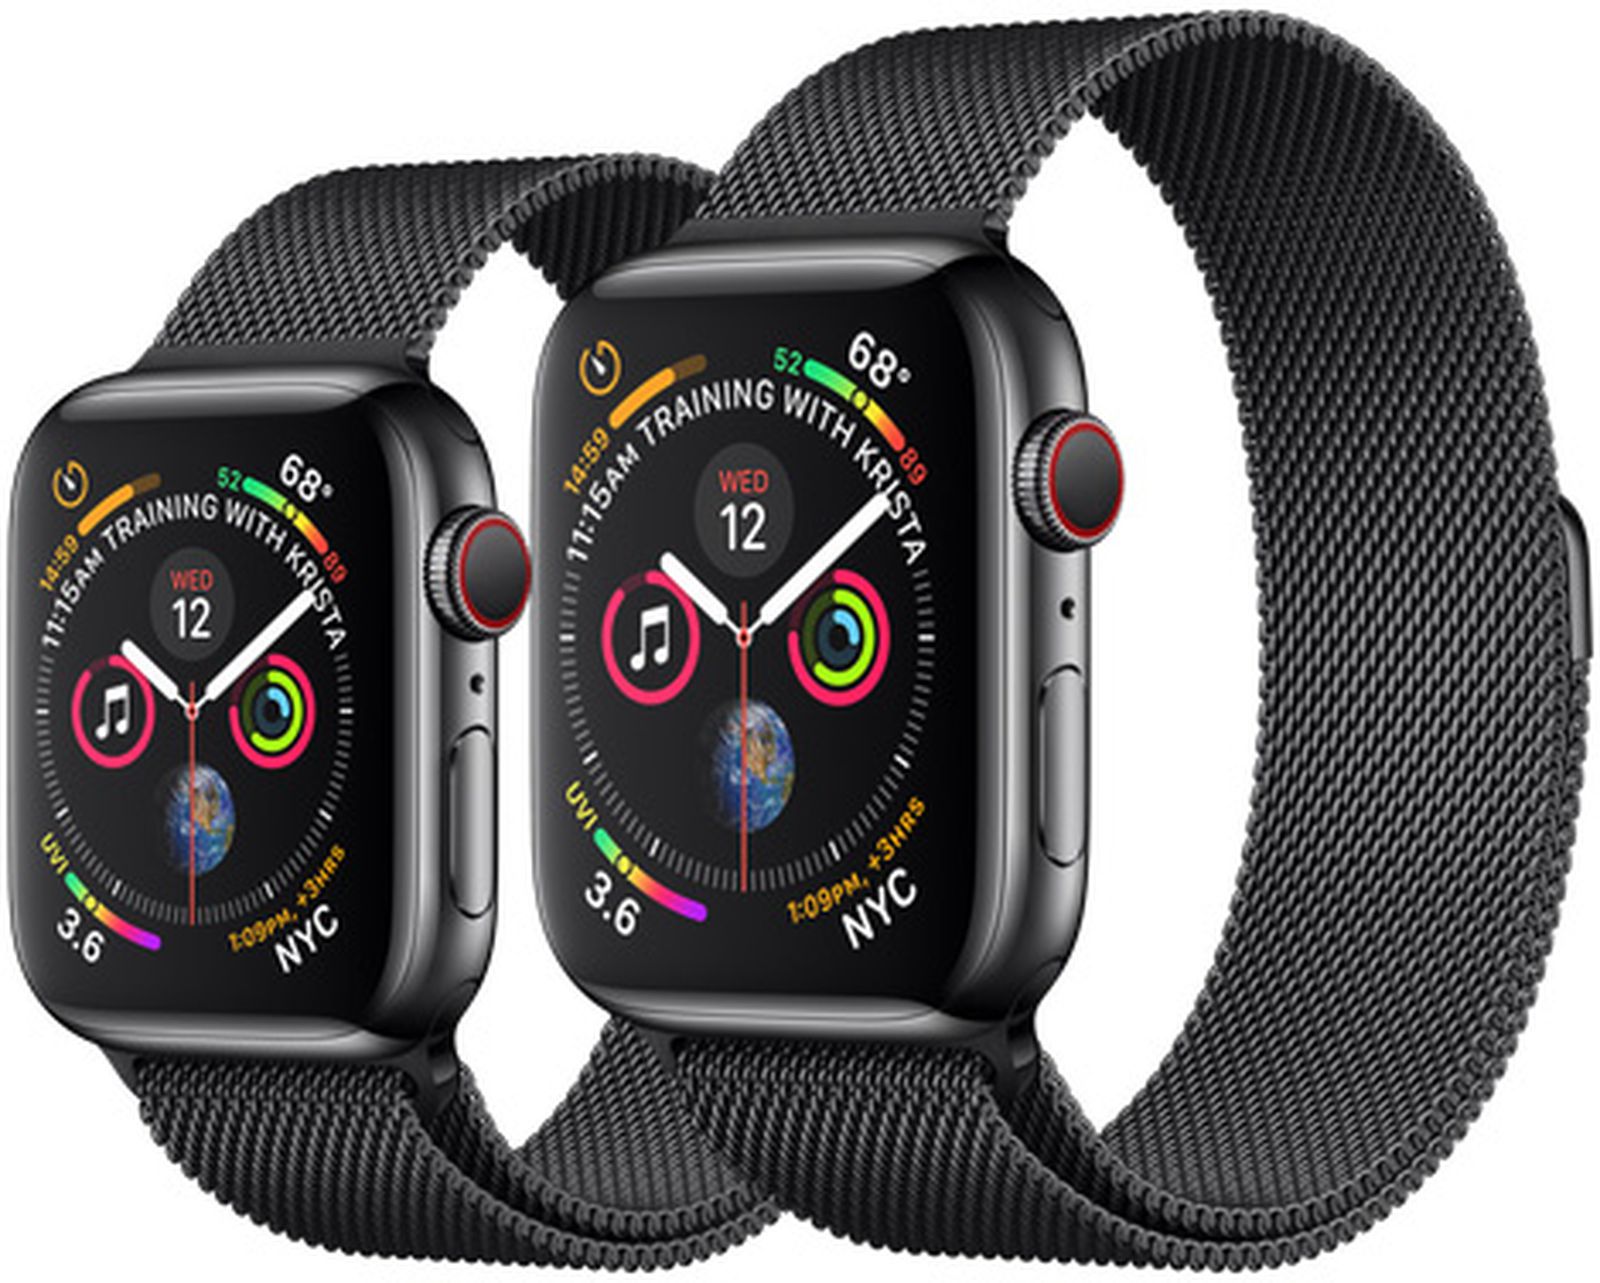 Is an Apple Watch with LTE Worth the Investment? 13